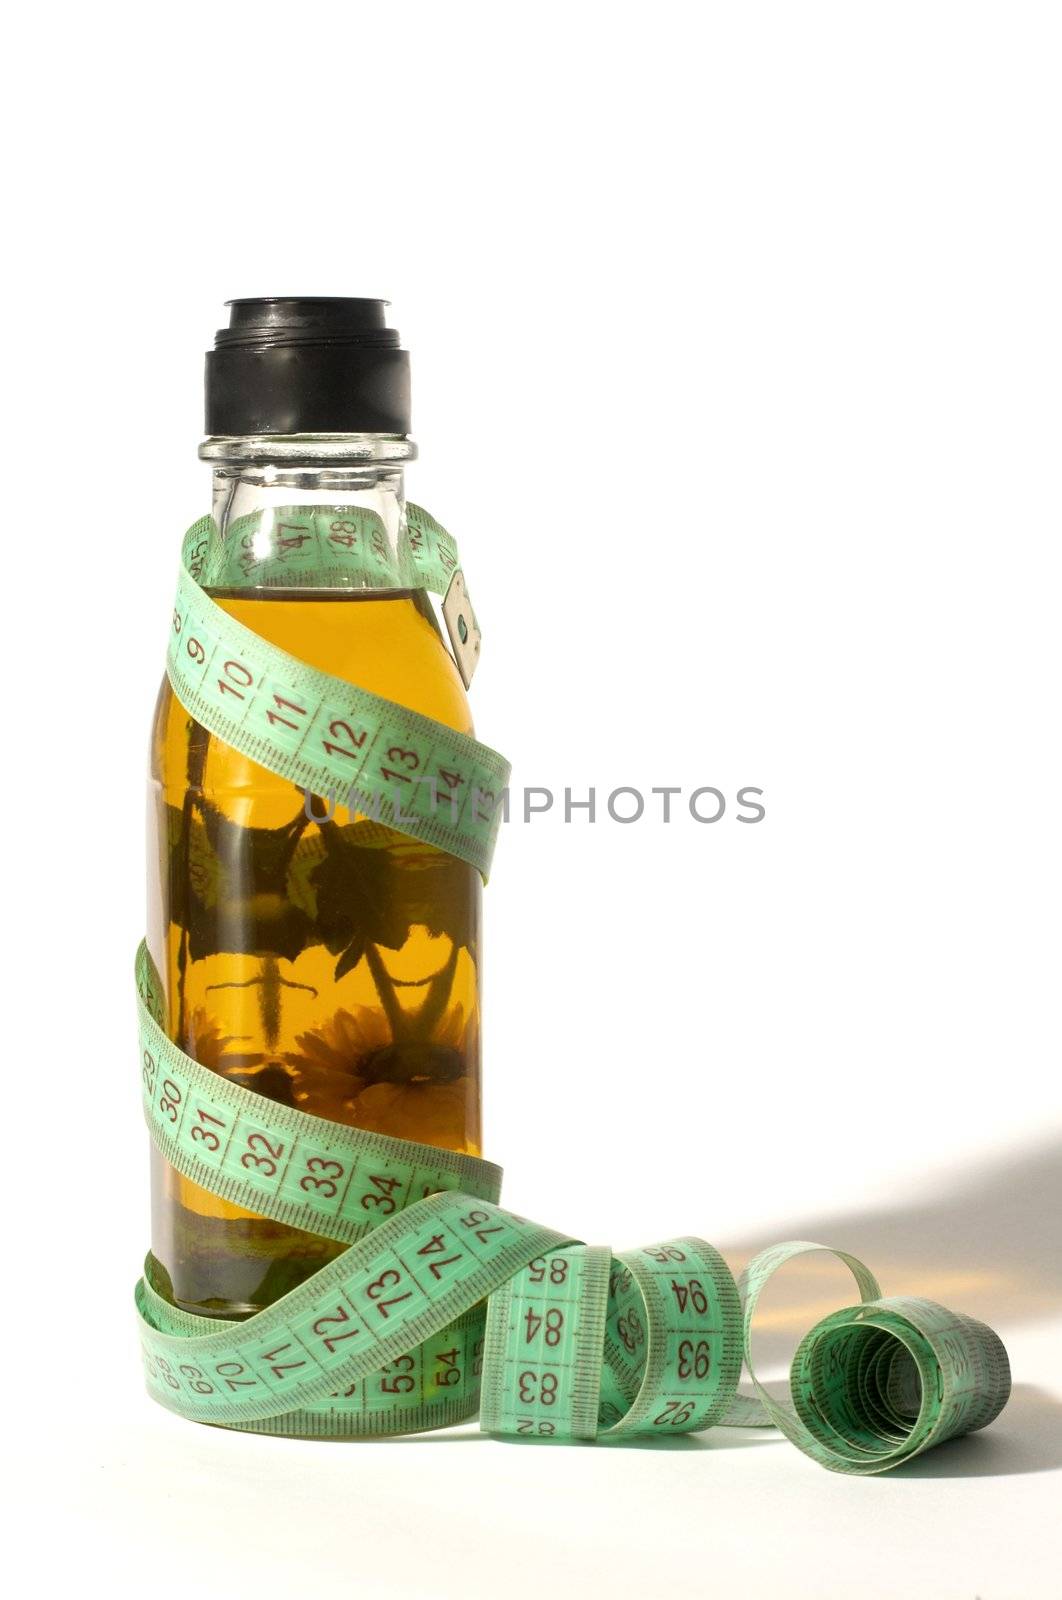 An image with olive oil for massage